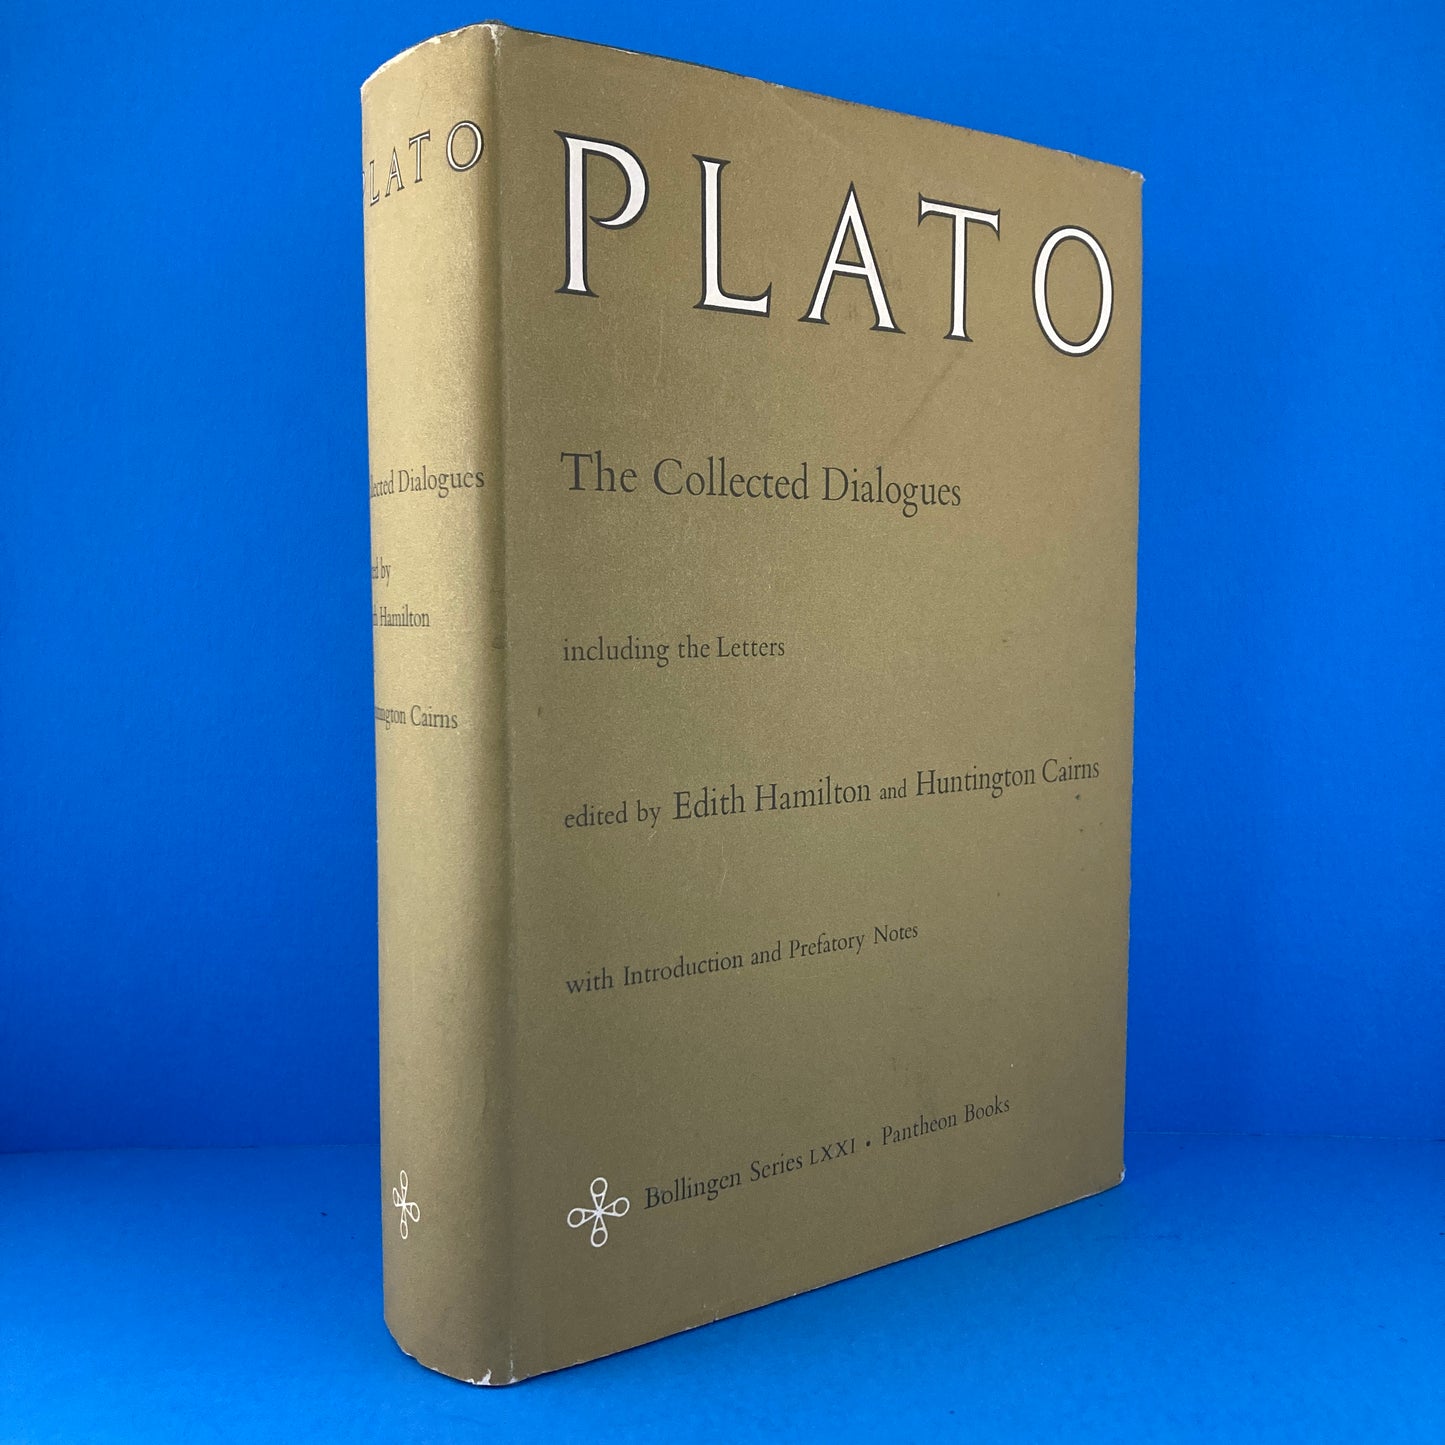 The Collected Dialogues of Plato Including the Letters